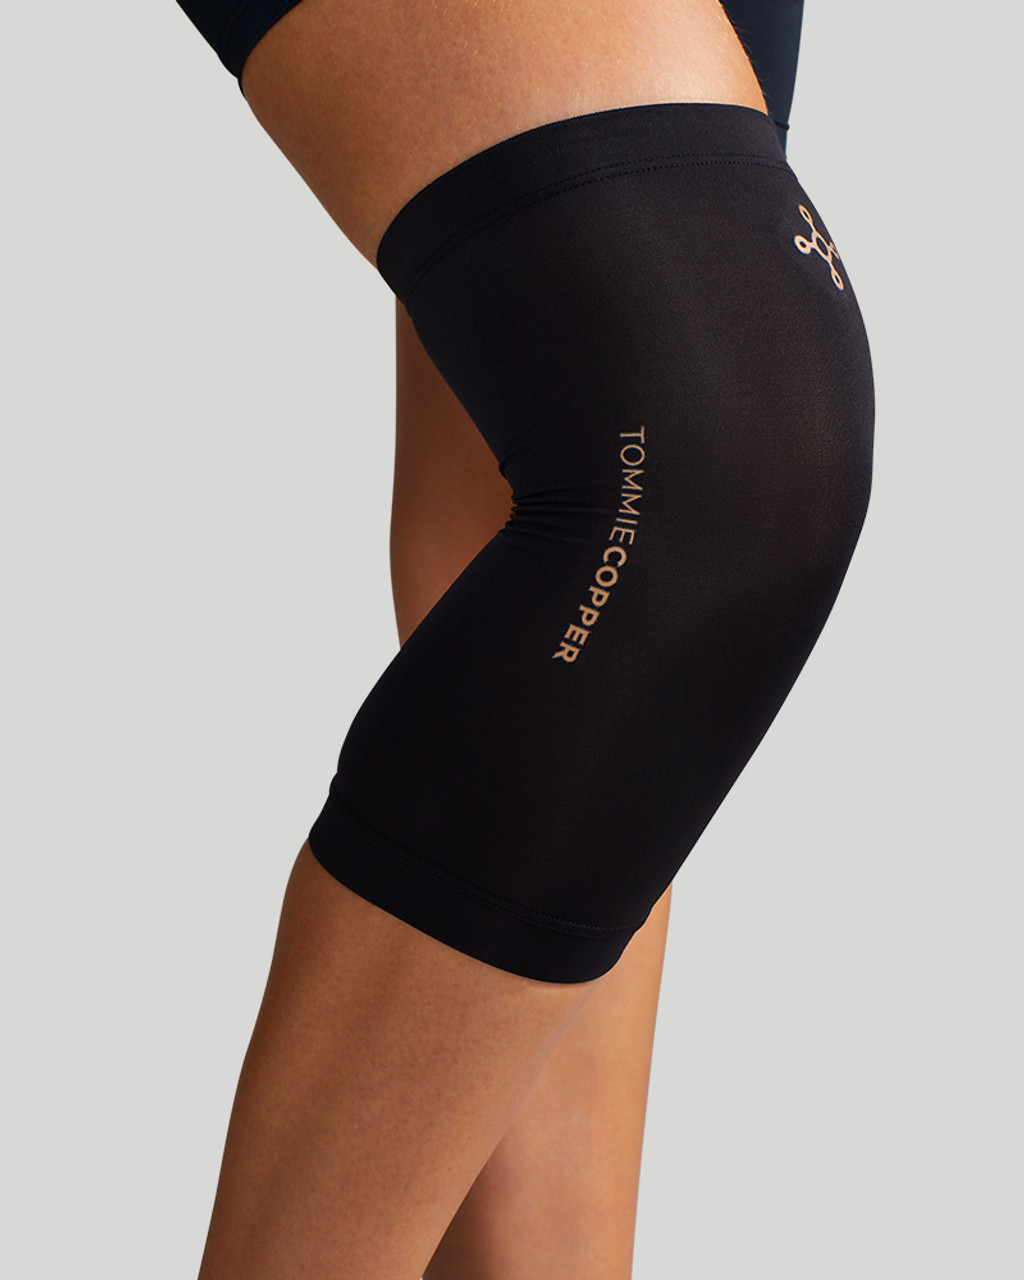  Tommie Copper Contoured Knee Sleeve, Black, XX-Large : Health &  Household